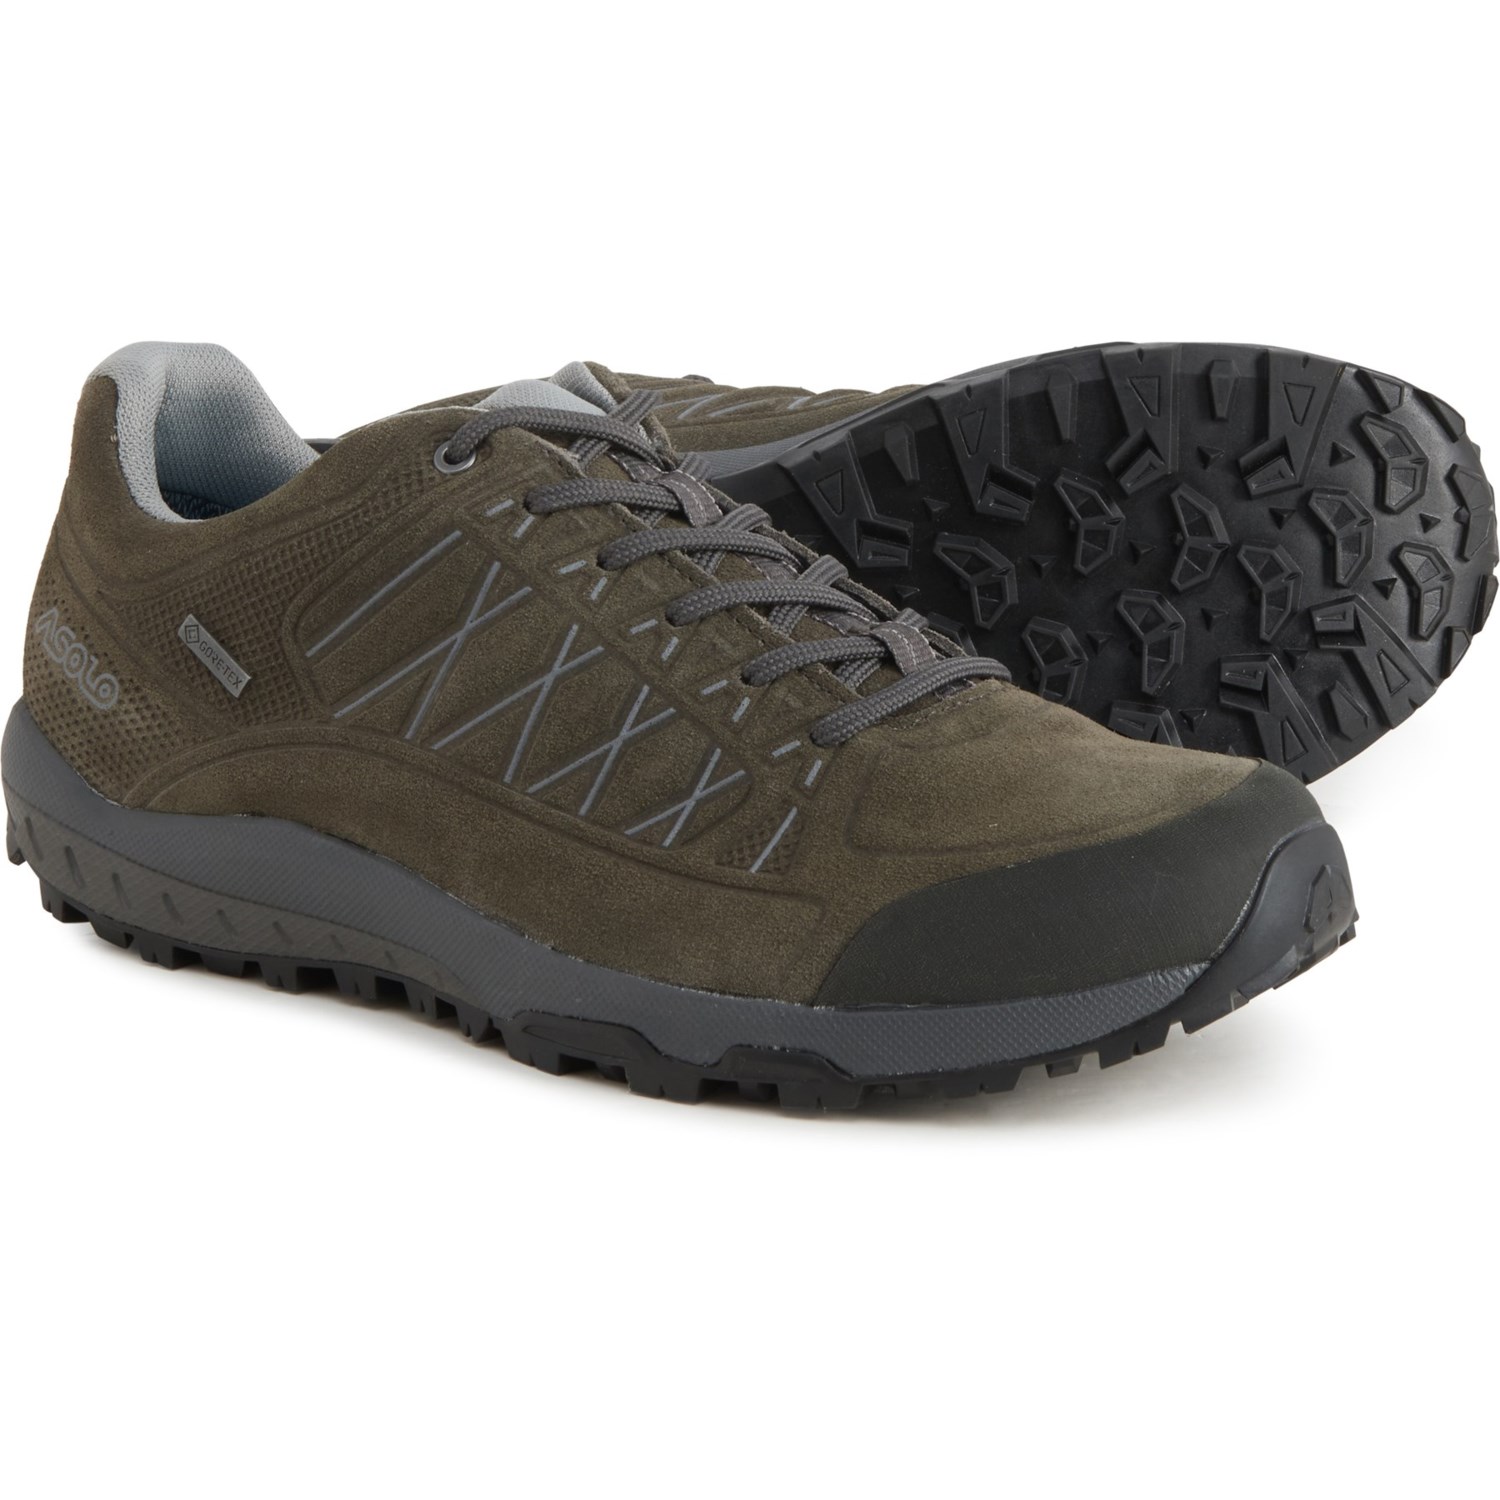 Asolo Grid GV Gore-Tex Hiking Shoes - Waterproof, Leather (For Women)